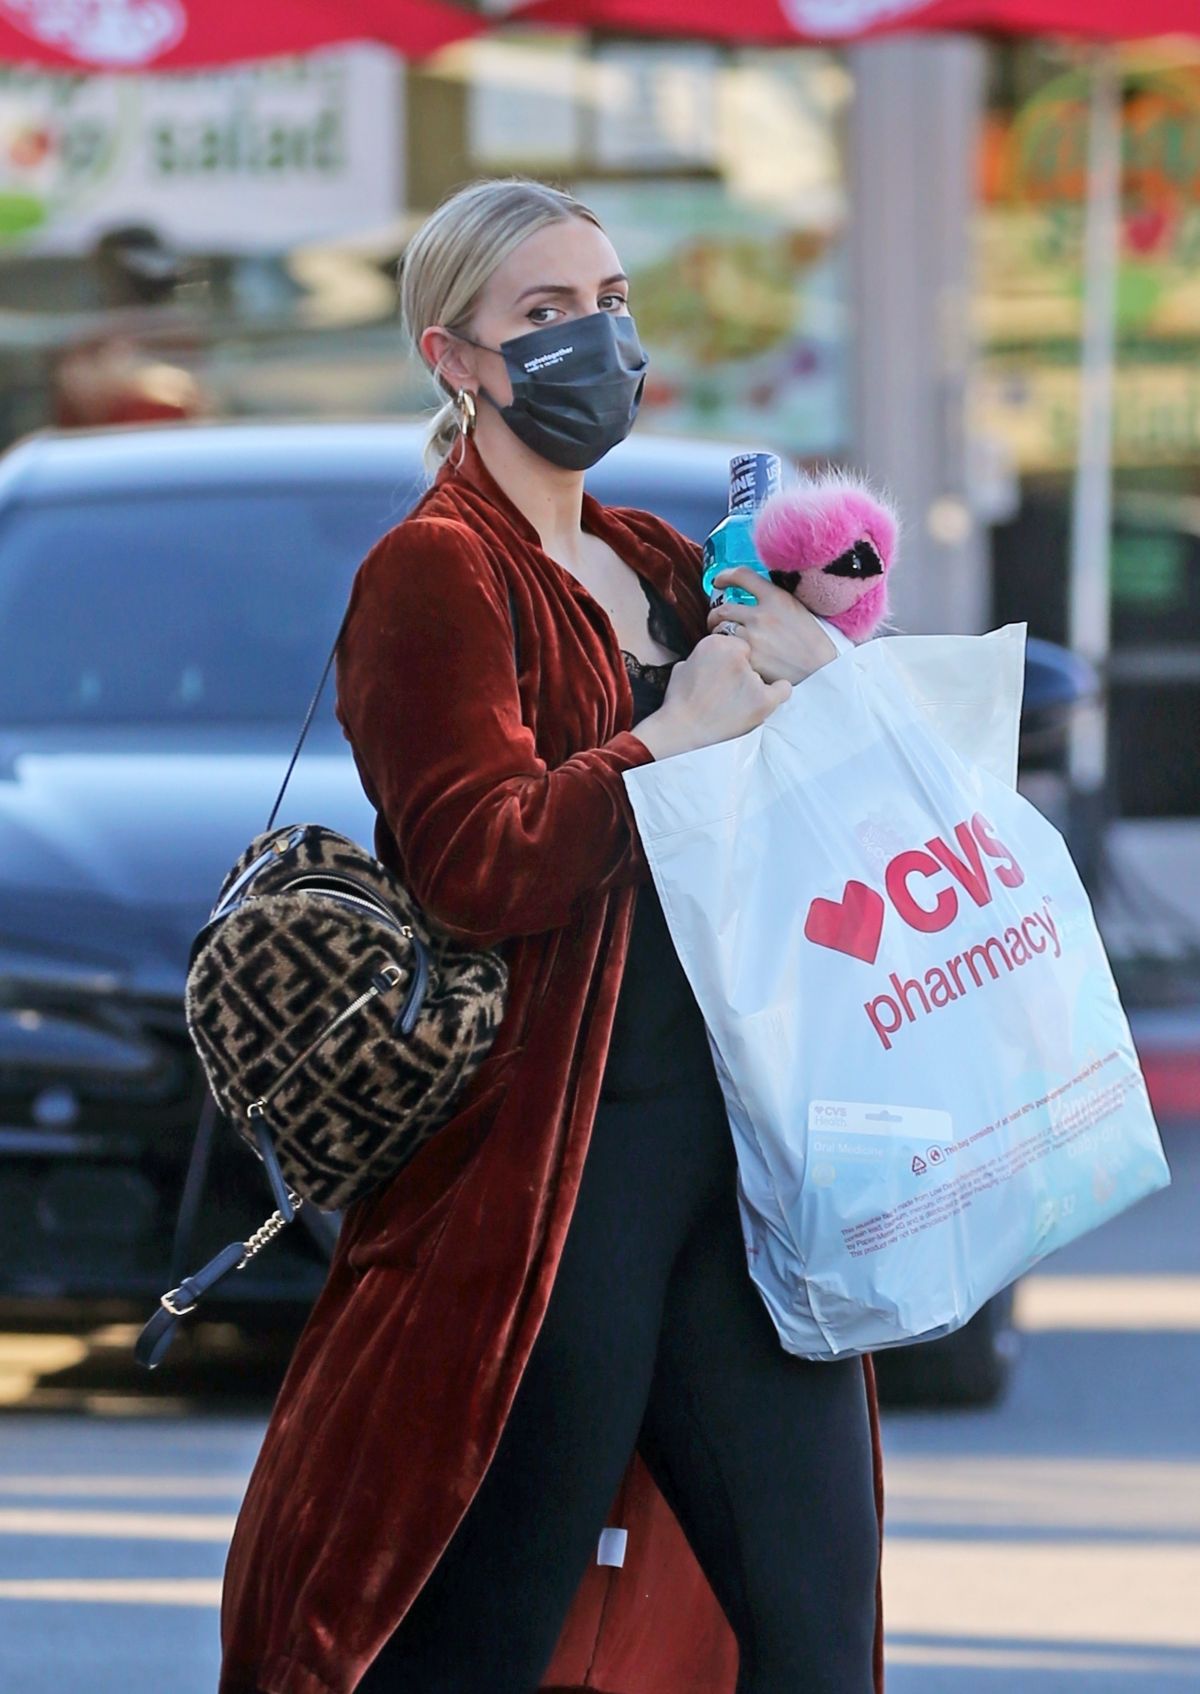 ASHLEE SIMPSON Shopping at CVS in Los Angeles 01/14/2021 – HawtCelebs